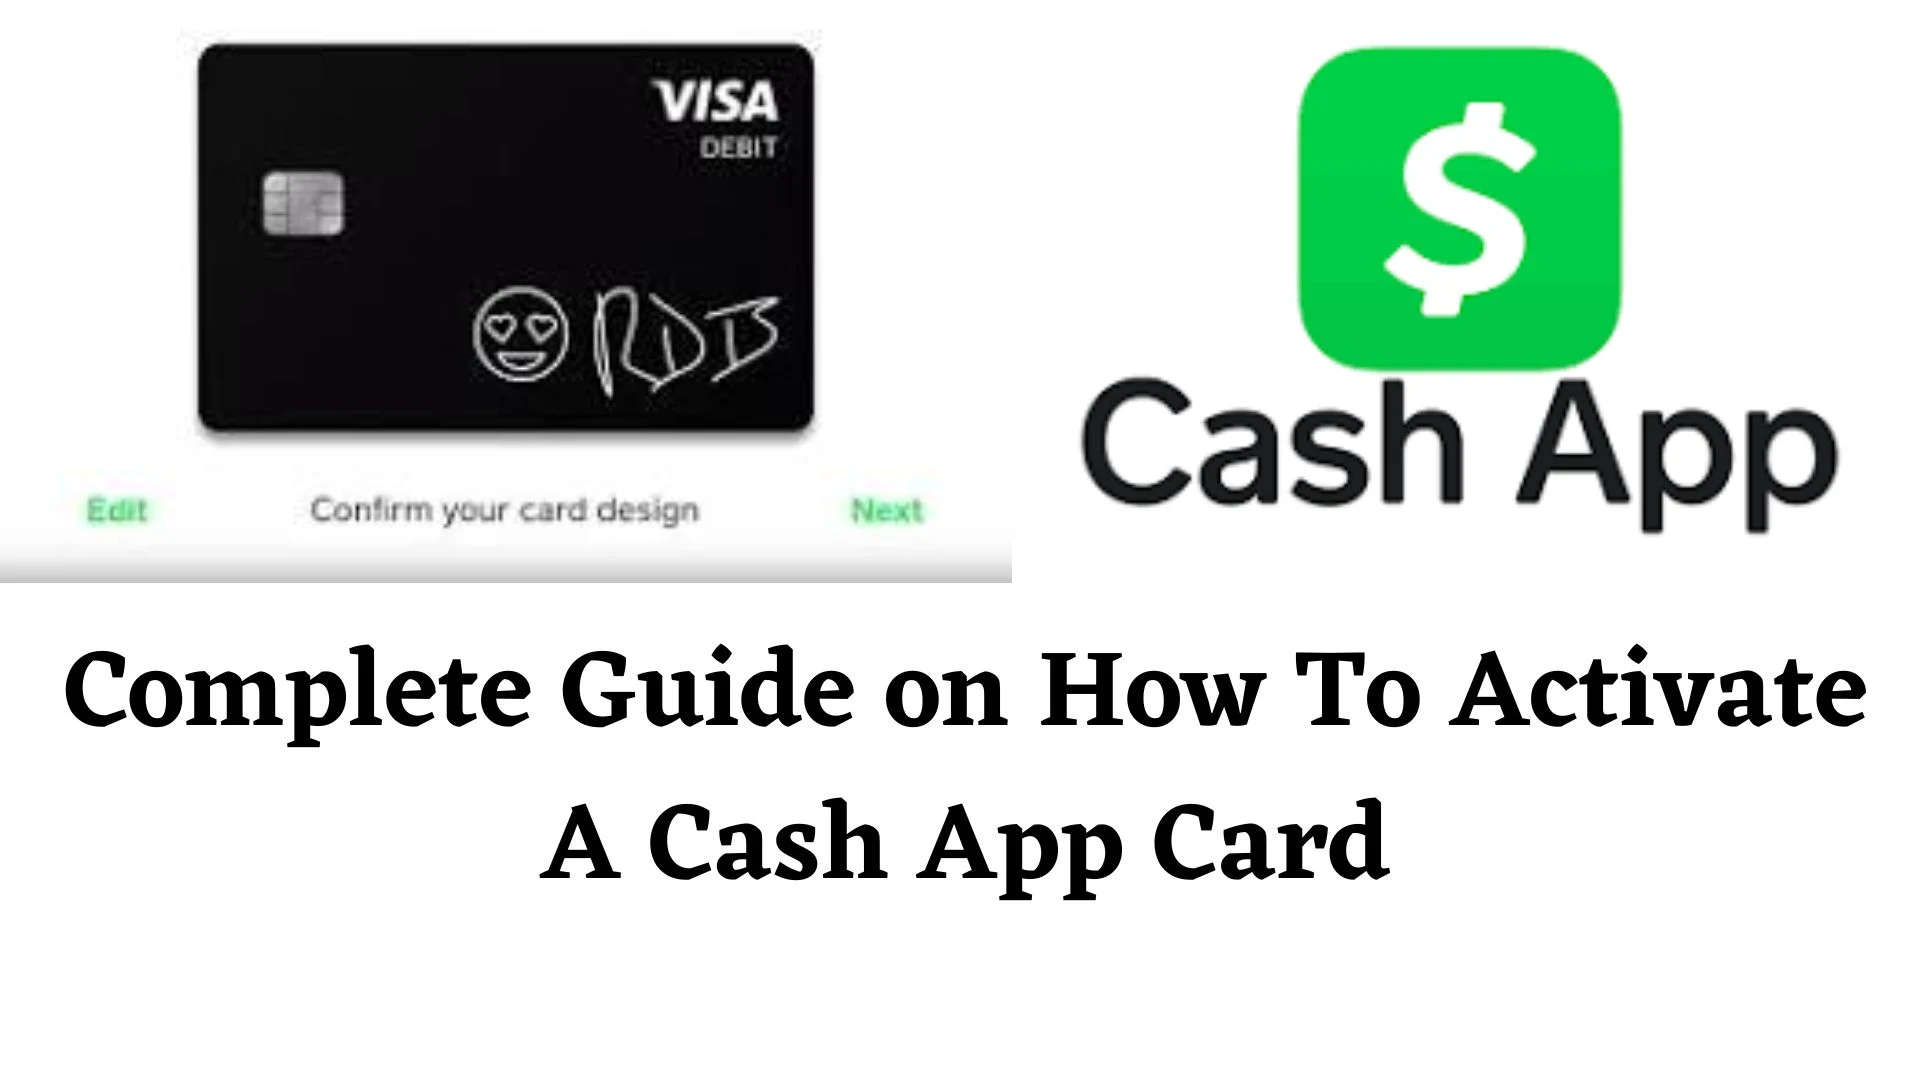 How To Activate A Cash App Card